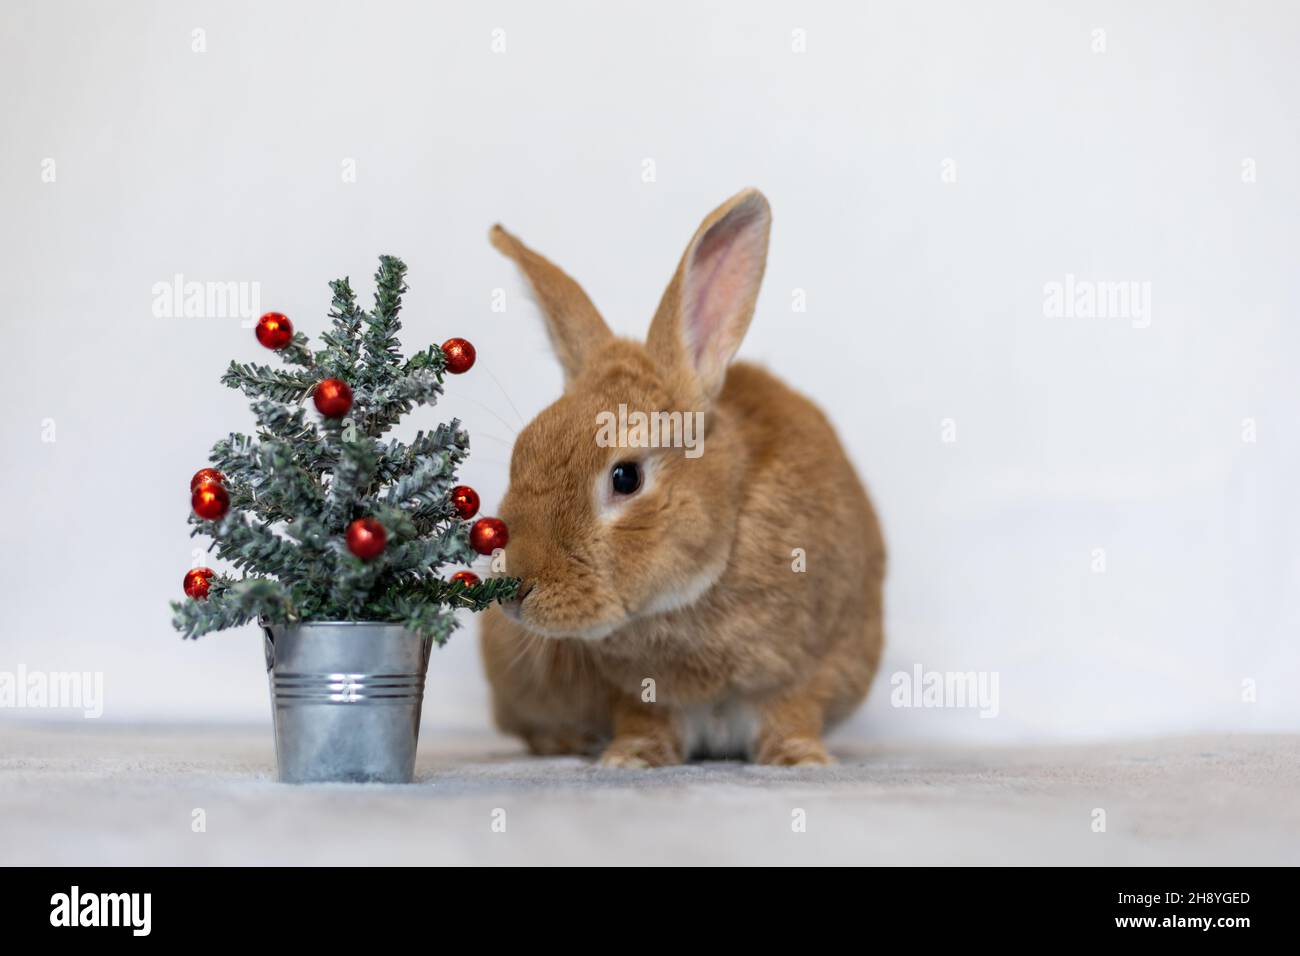 Rufus rabbit nudging Christmas tree white background copy space Stock Photo